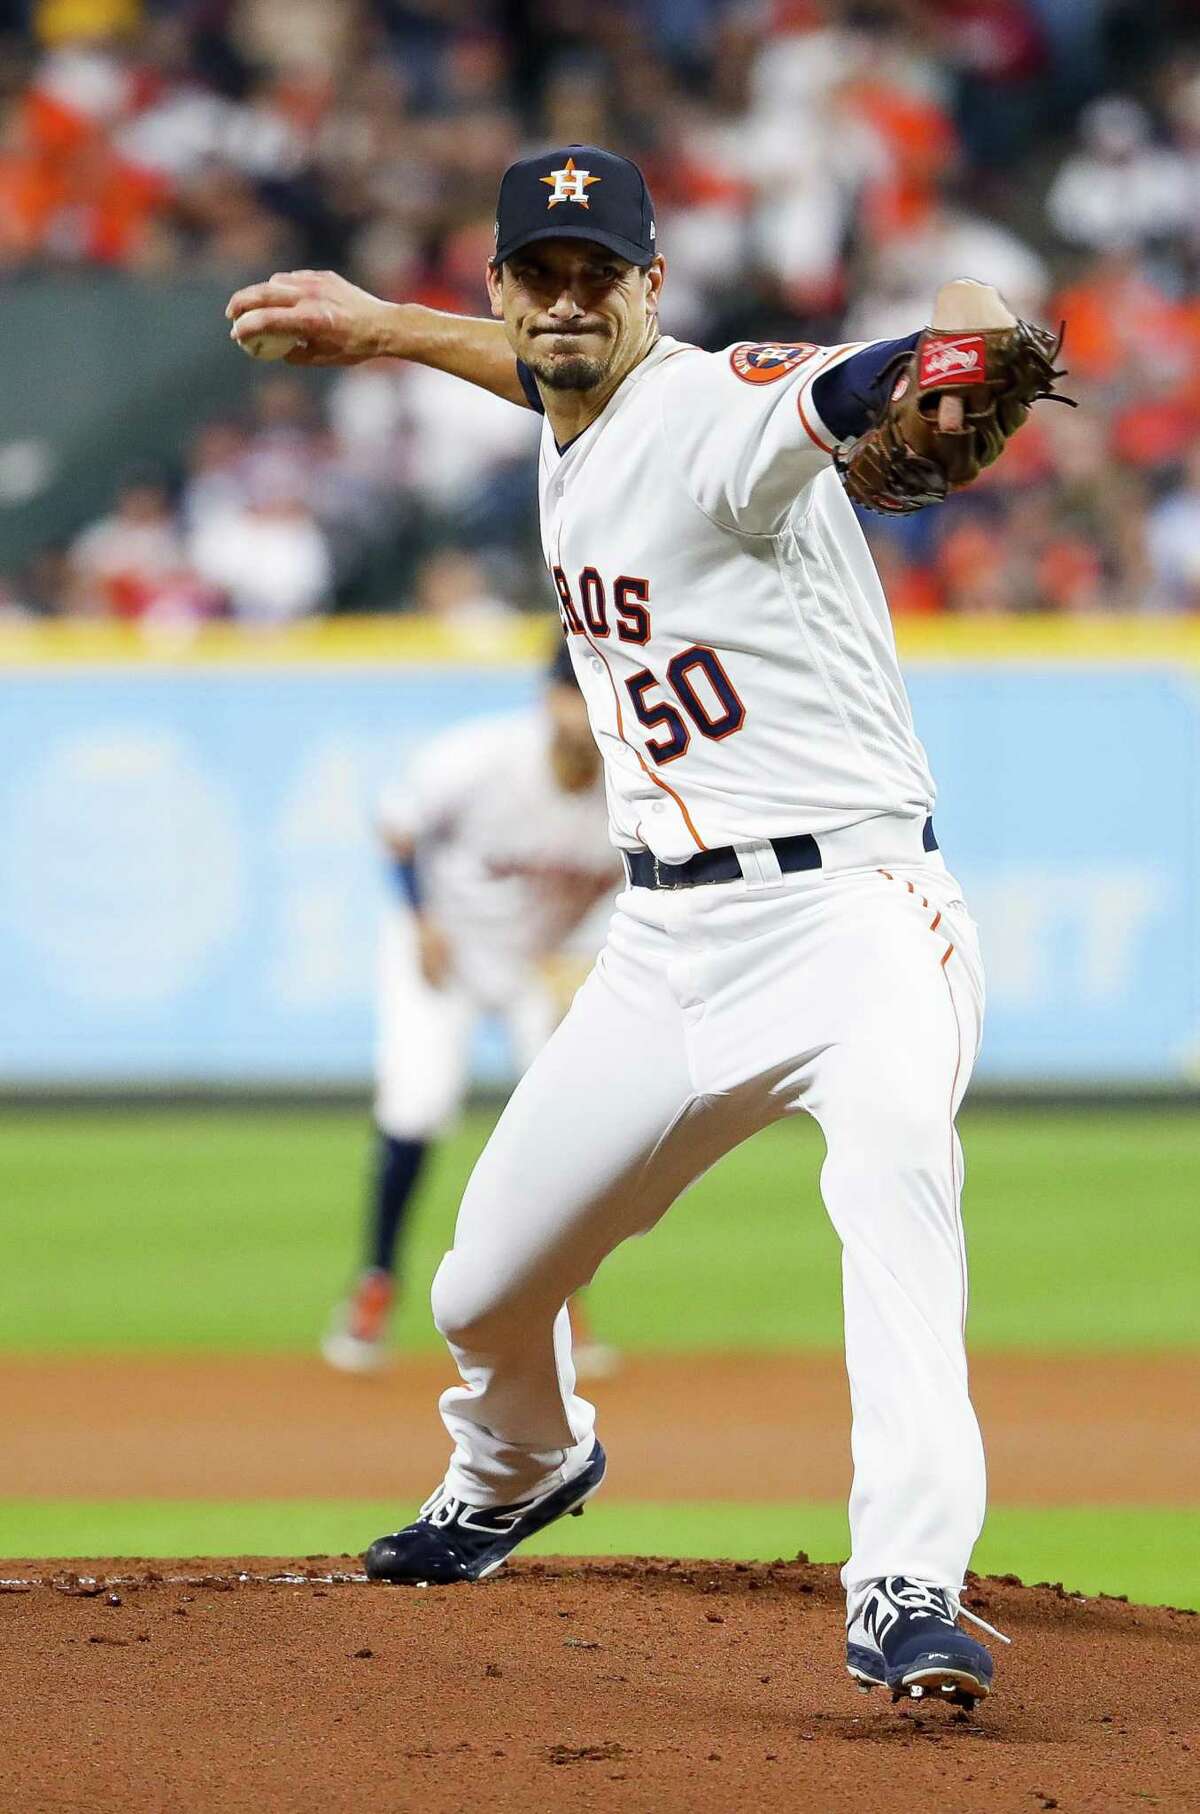 The Astros declined to extend a one-year, $17.9 million qualifying offer to starting pitcher Charlie Morton, but it does not preclude the team from re-signing the free-agent righthander.